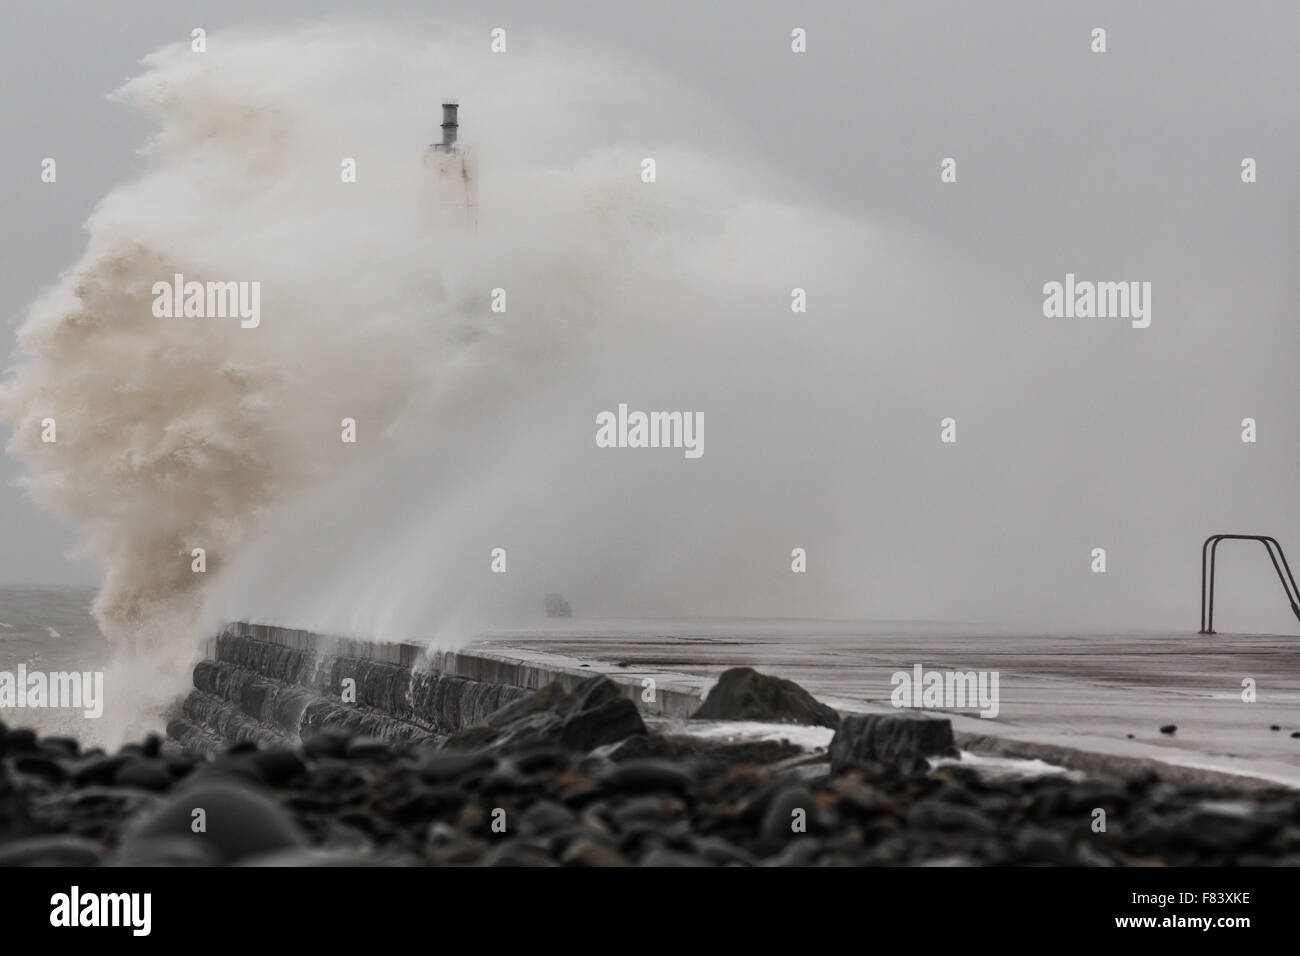 Wales, UK. 05th December 2015 Storm Desmond, the 4th named recent storms brings gale force winds and rough seas to Aberystwyth, battering the jetty near the harbour entrance. Credit:  Ian Jones/Alamy Live News Stock Photo